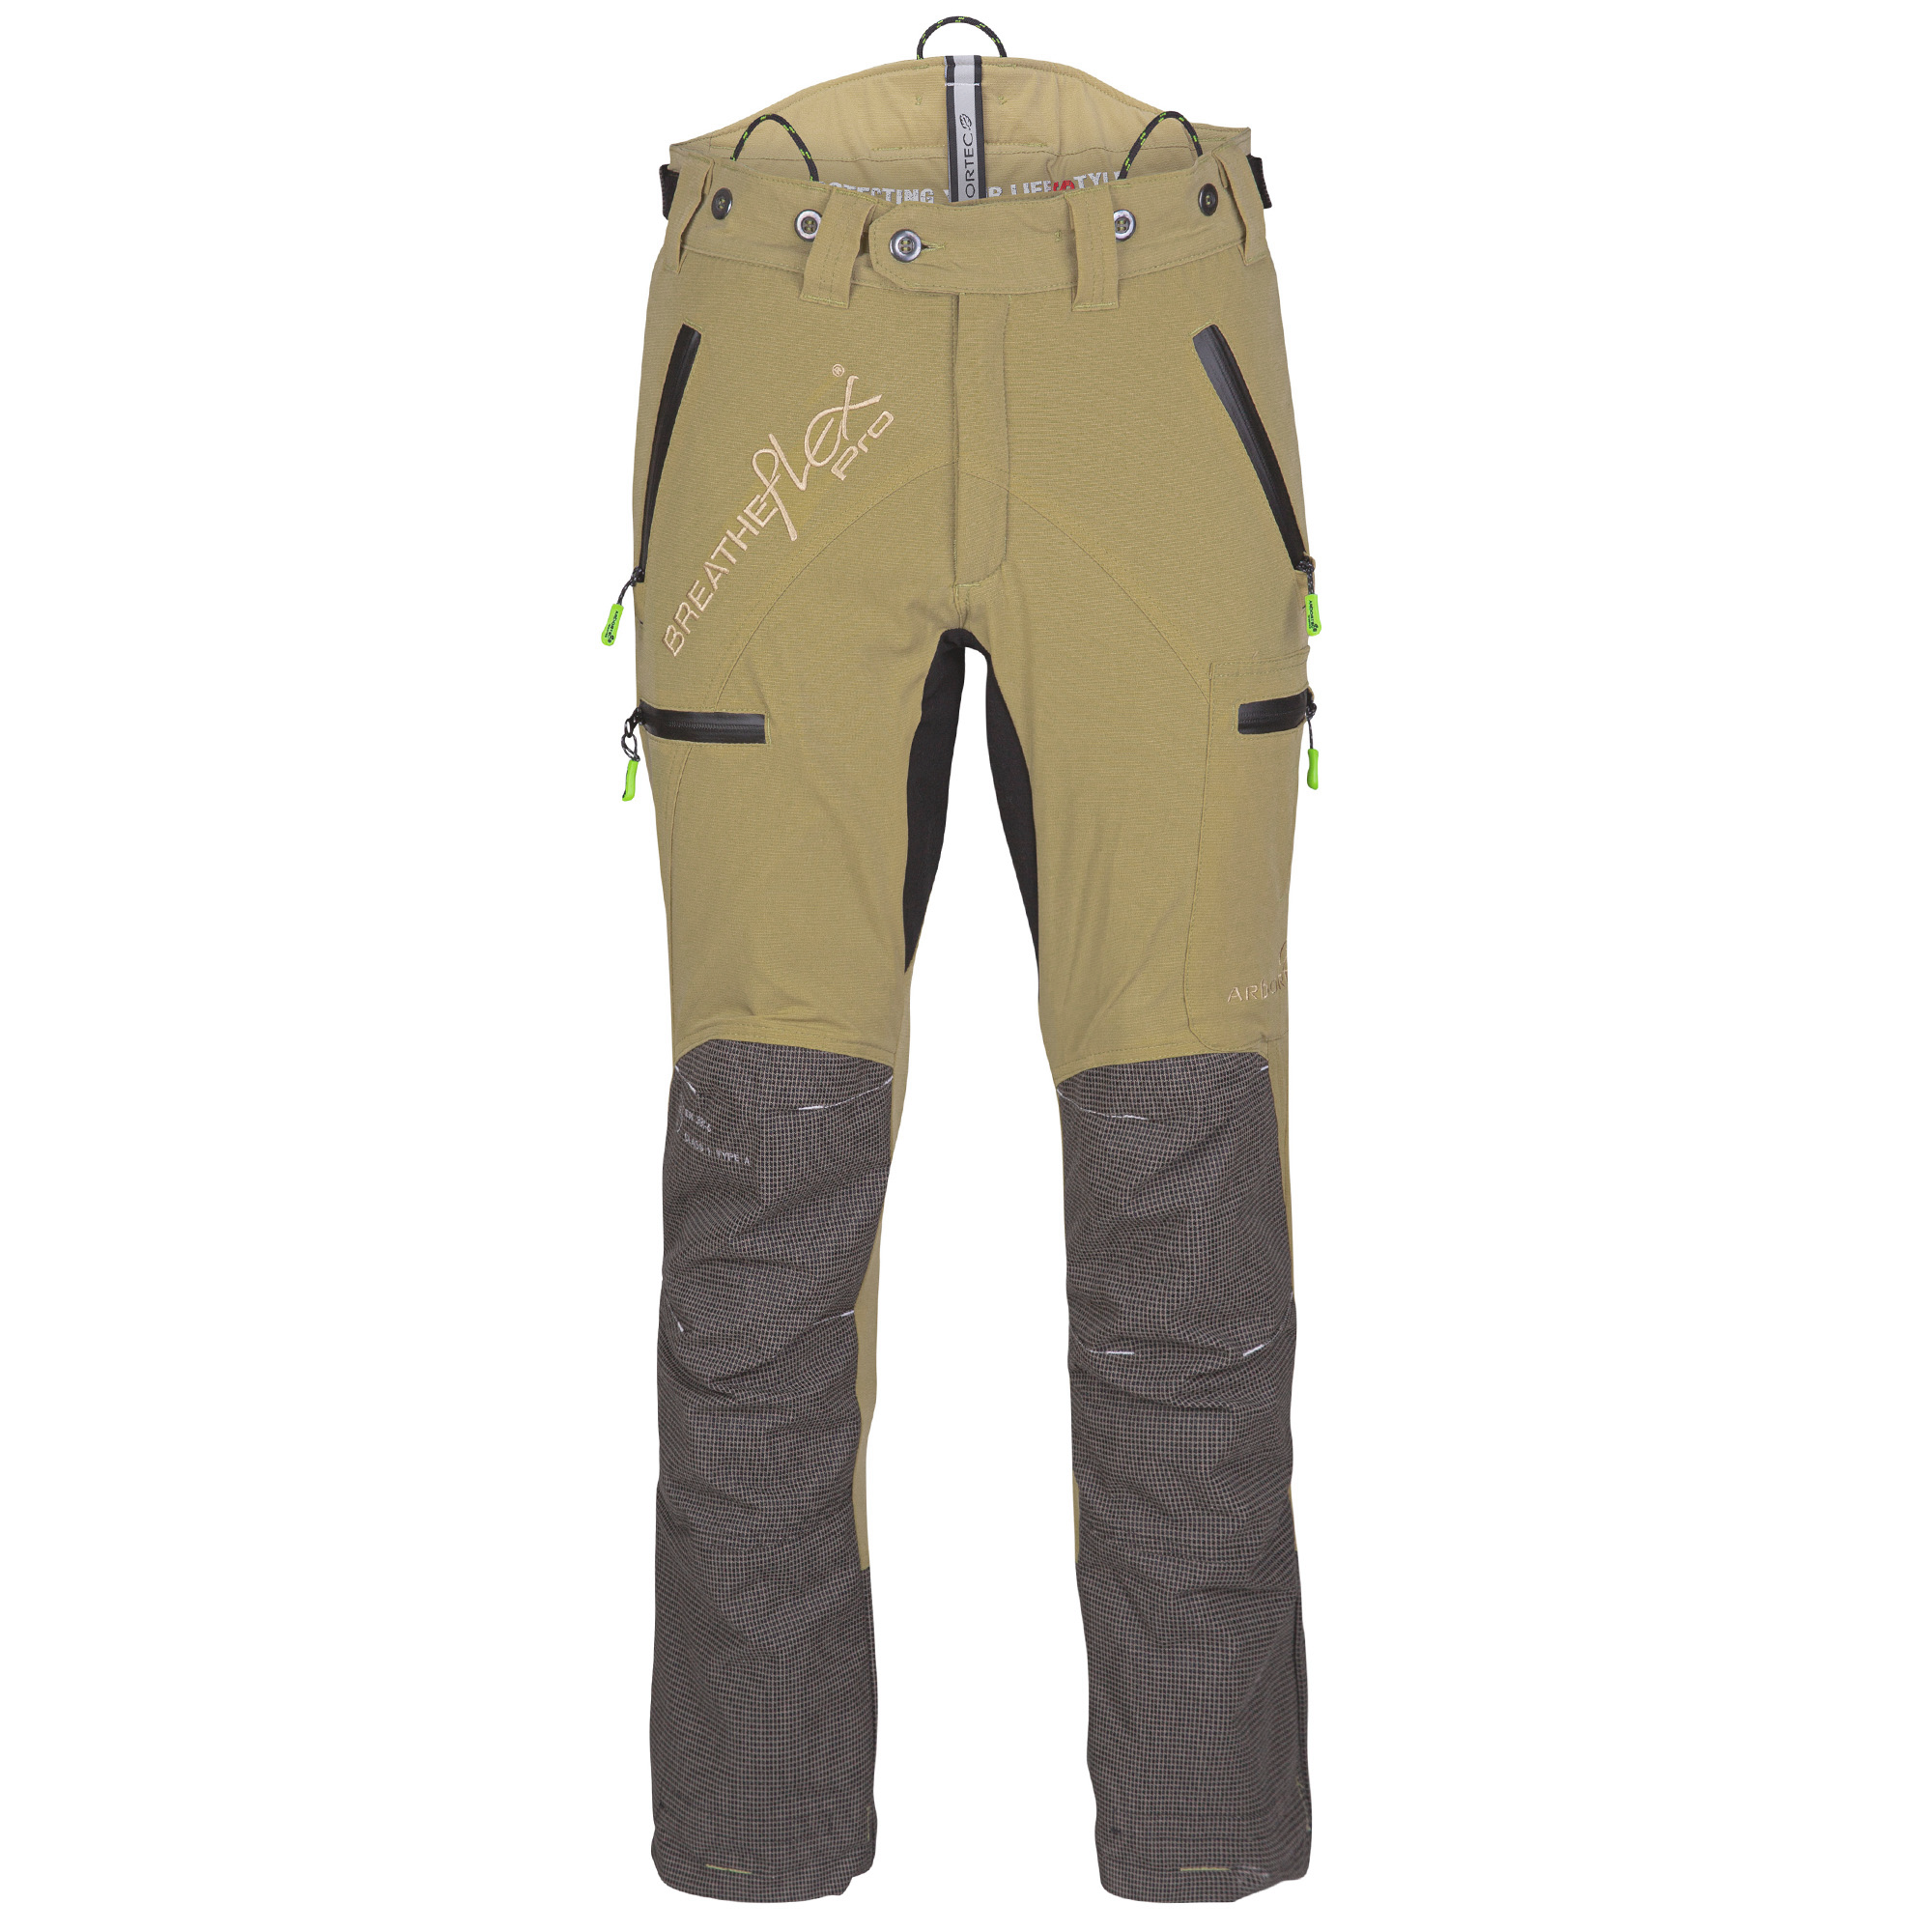 AT4060 Breatheflex Pro Chainsaw Trousers Design A Class 1 - Beige